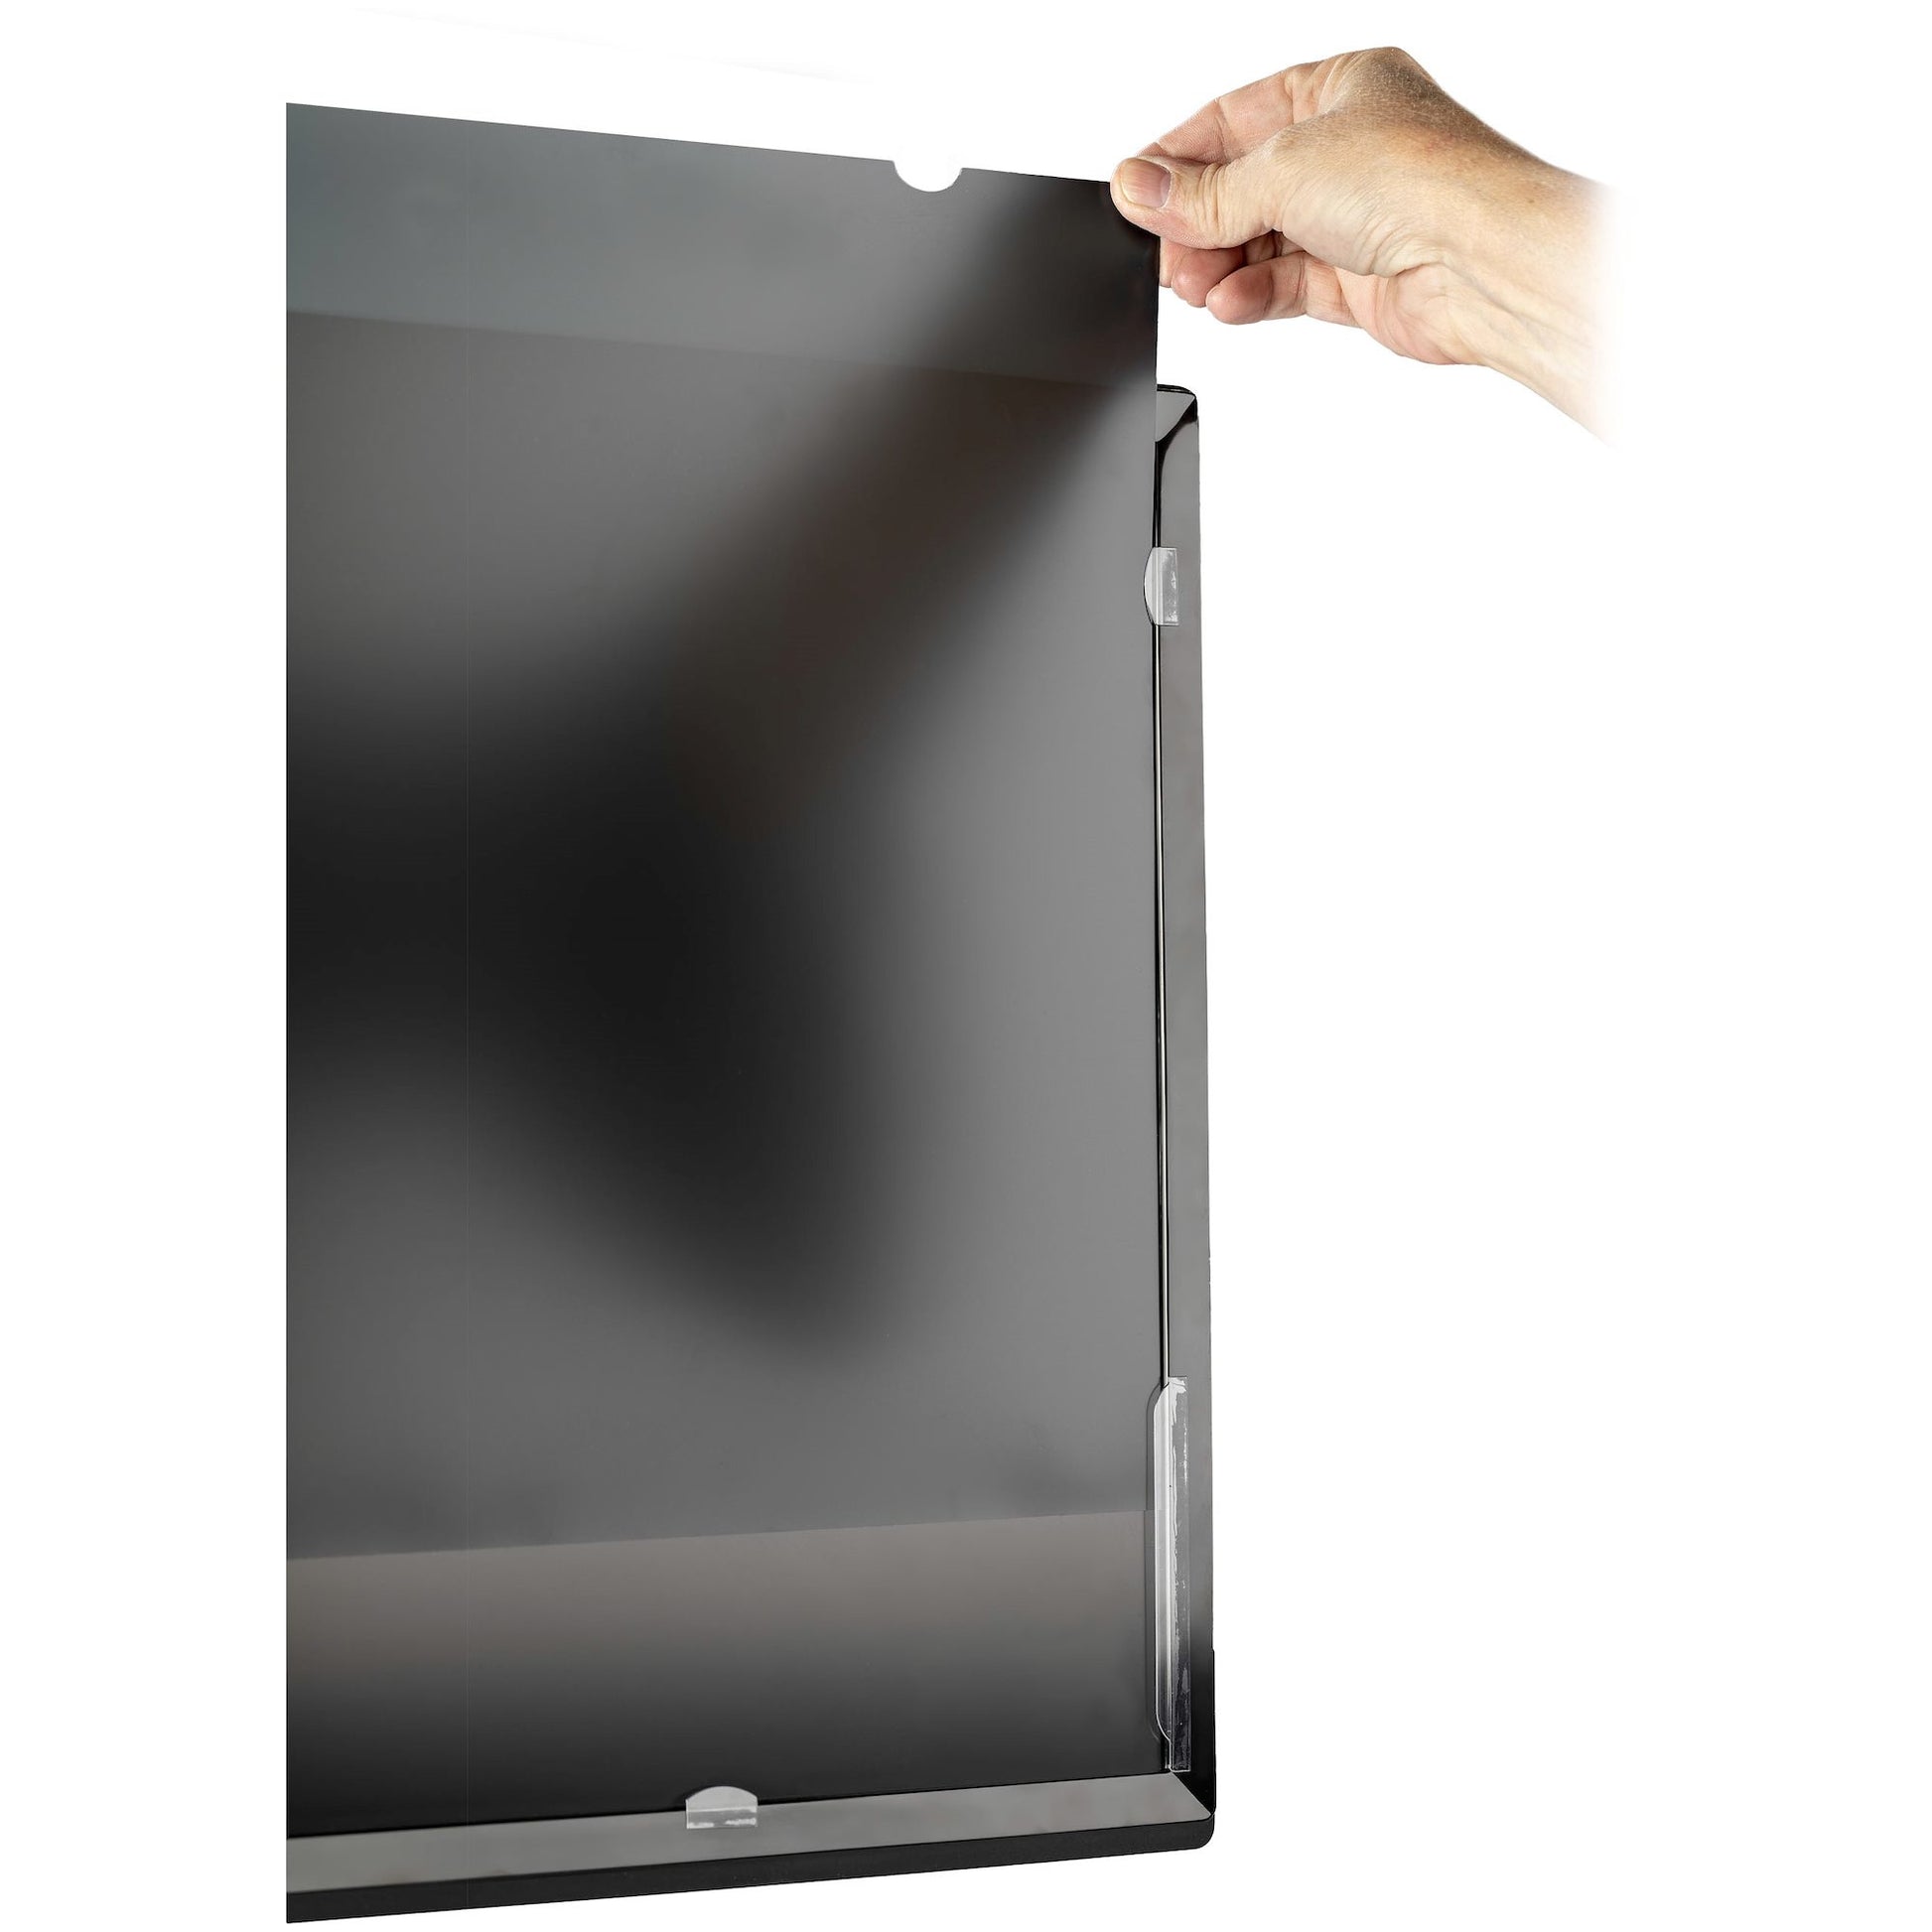 StarTech.com Monitor Privacy Screen for 24" Display - Computer Screen Security Filter - Blue Light Reducing Screen Protector Film - 16:10 Widescreen - Matte/Glossy - +/-30 Degree-1